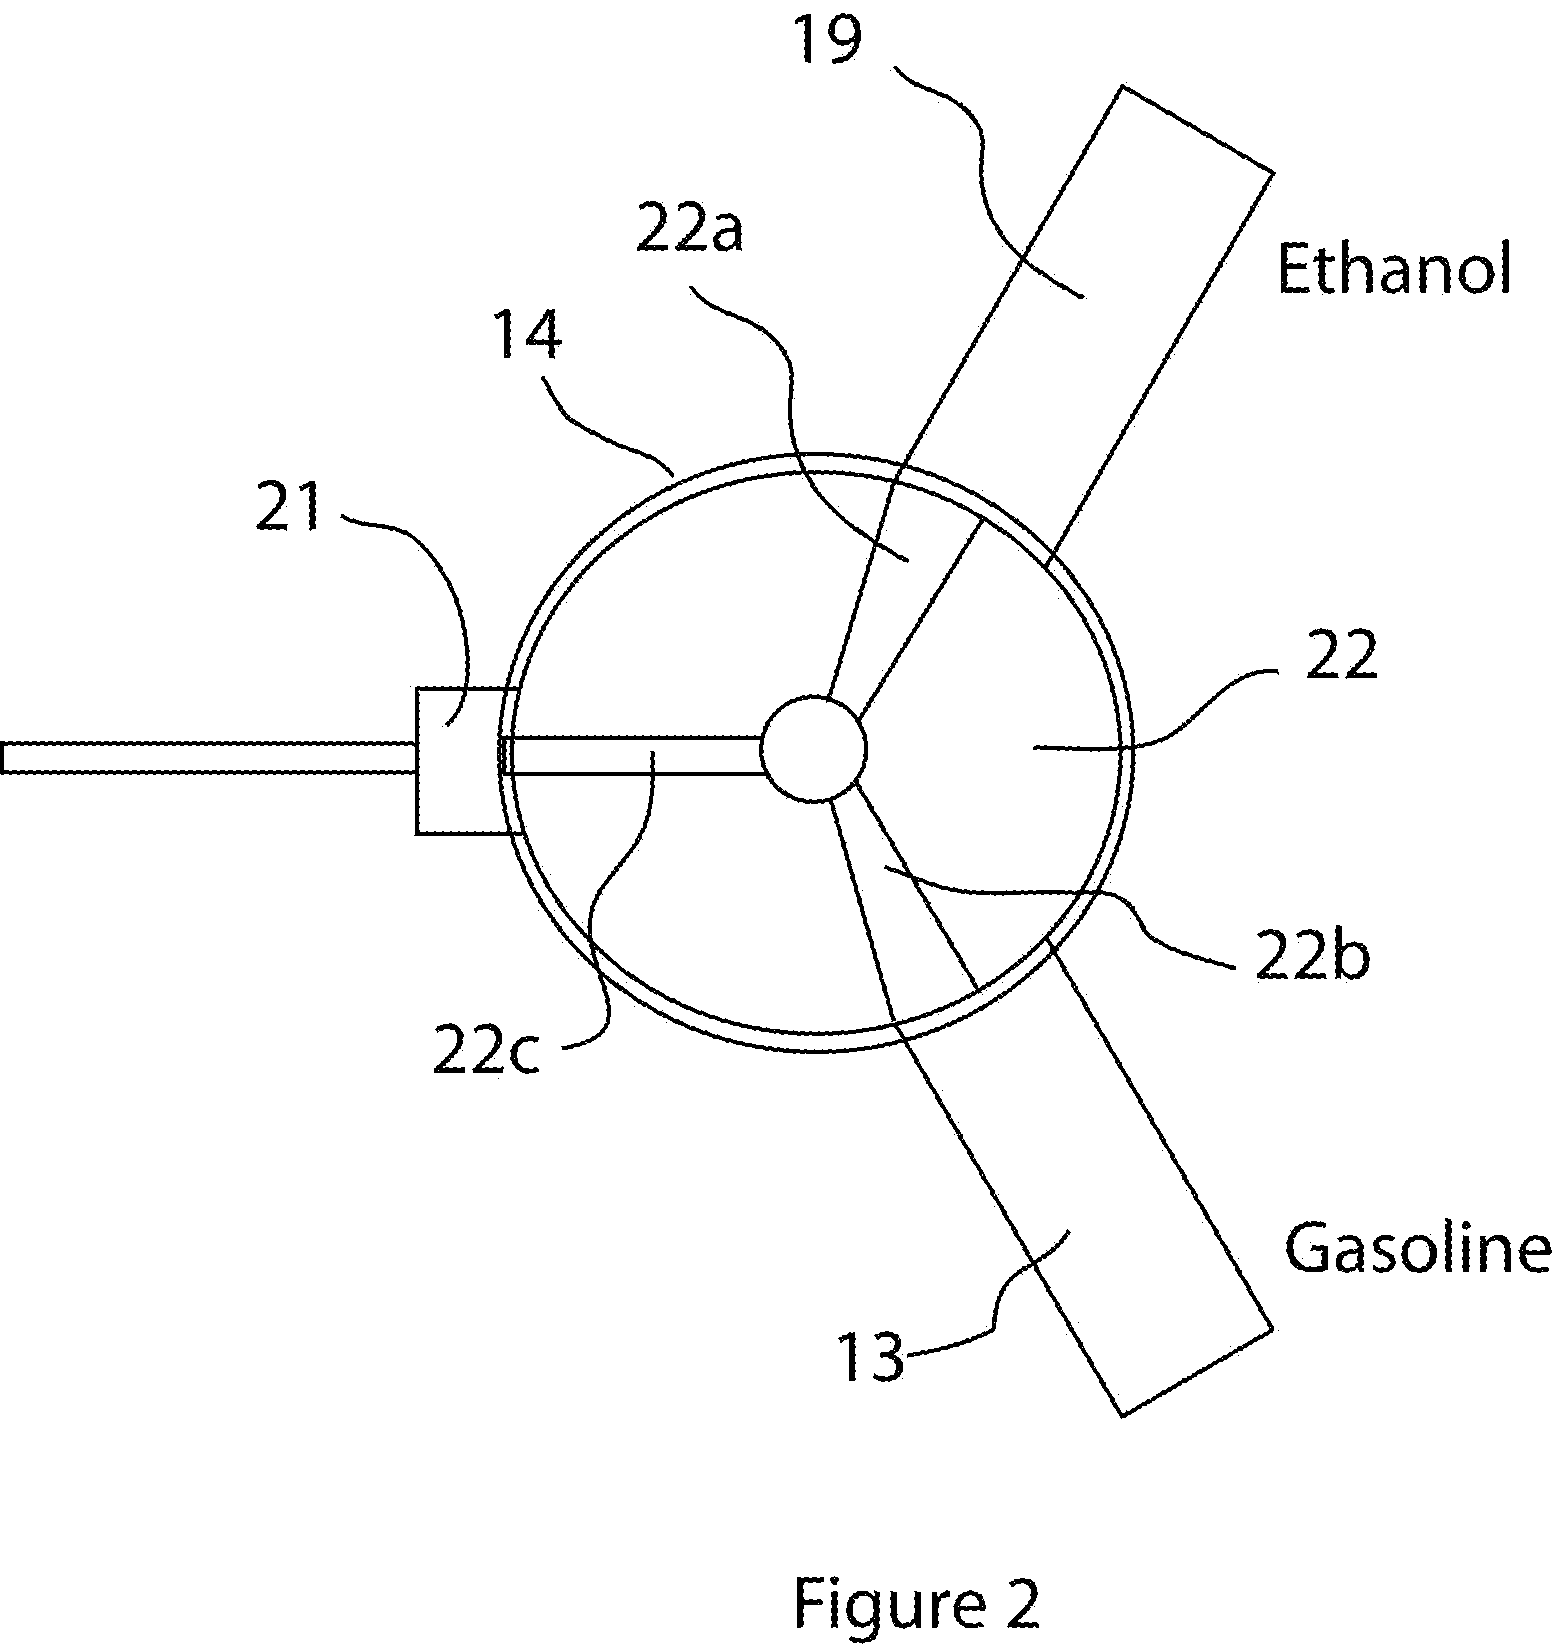 Single nozzle injection of gasoline and Anti-knock fuel